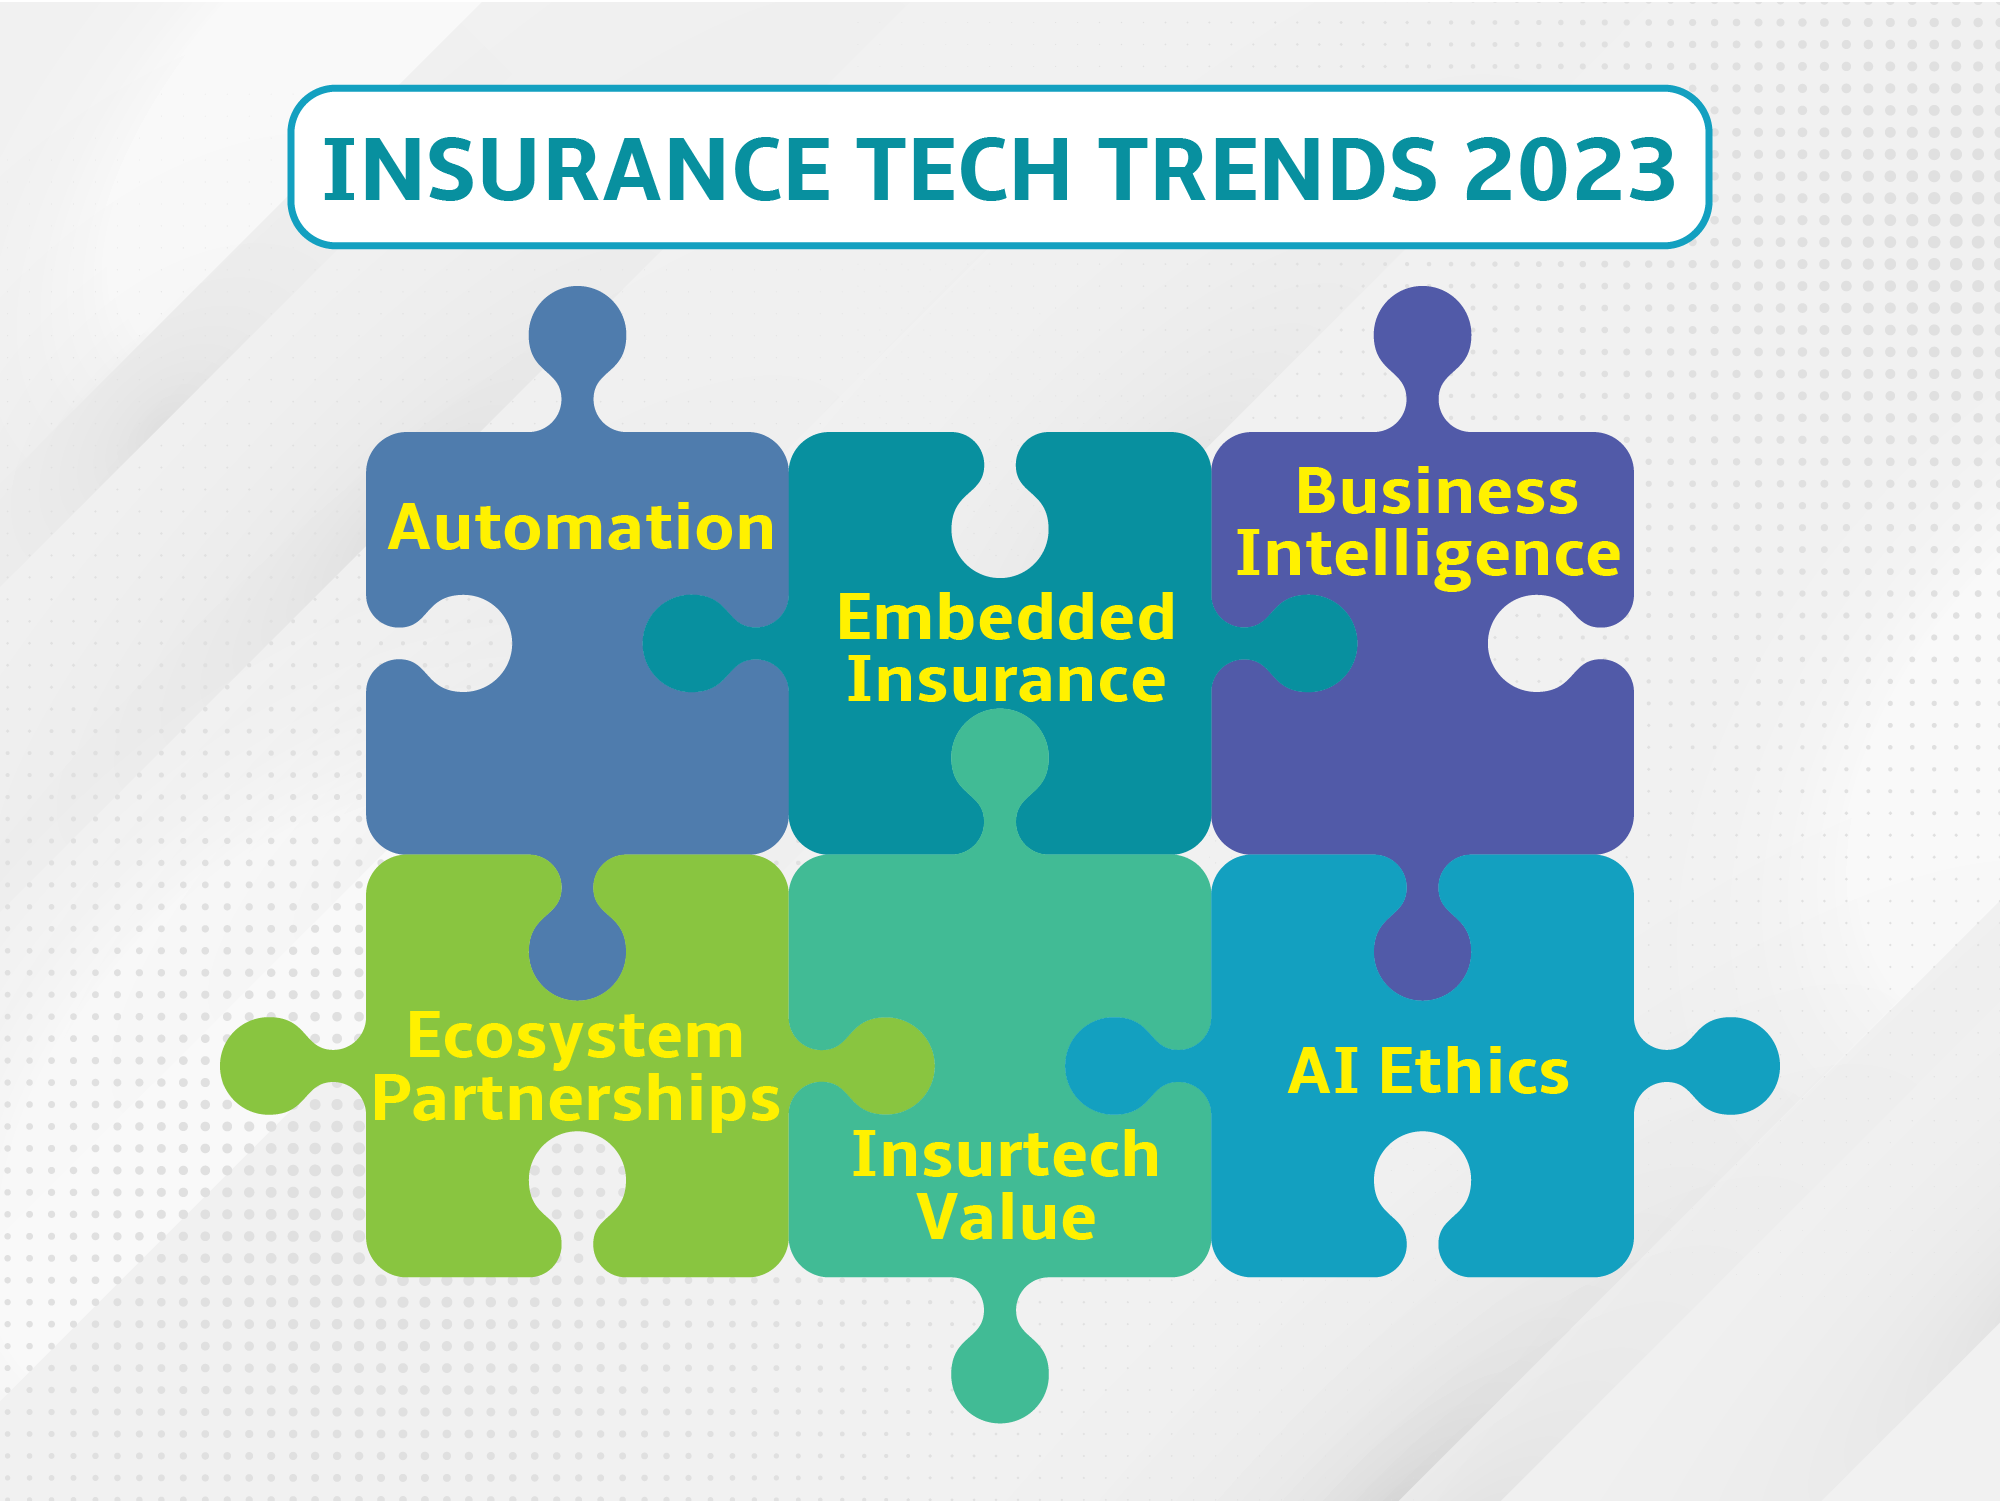 6 Insurance Technology Trends to Watch Out For in 2023